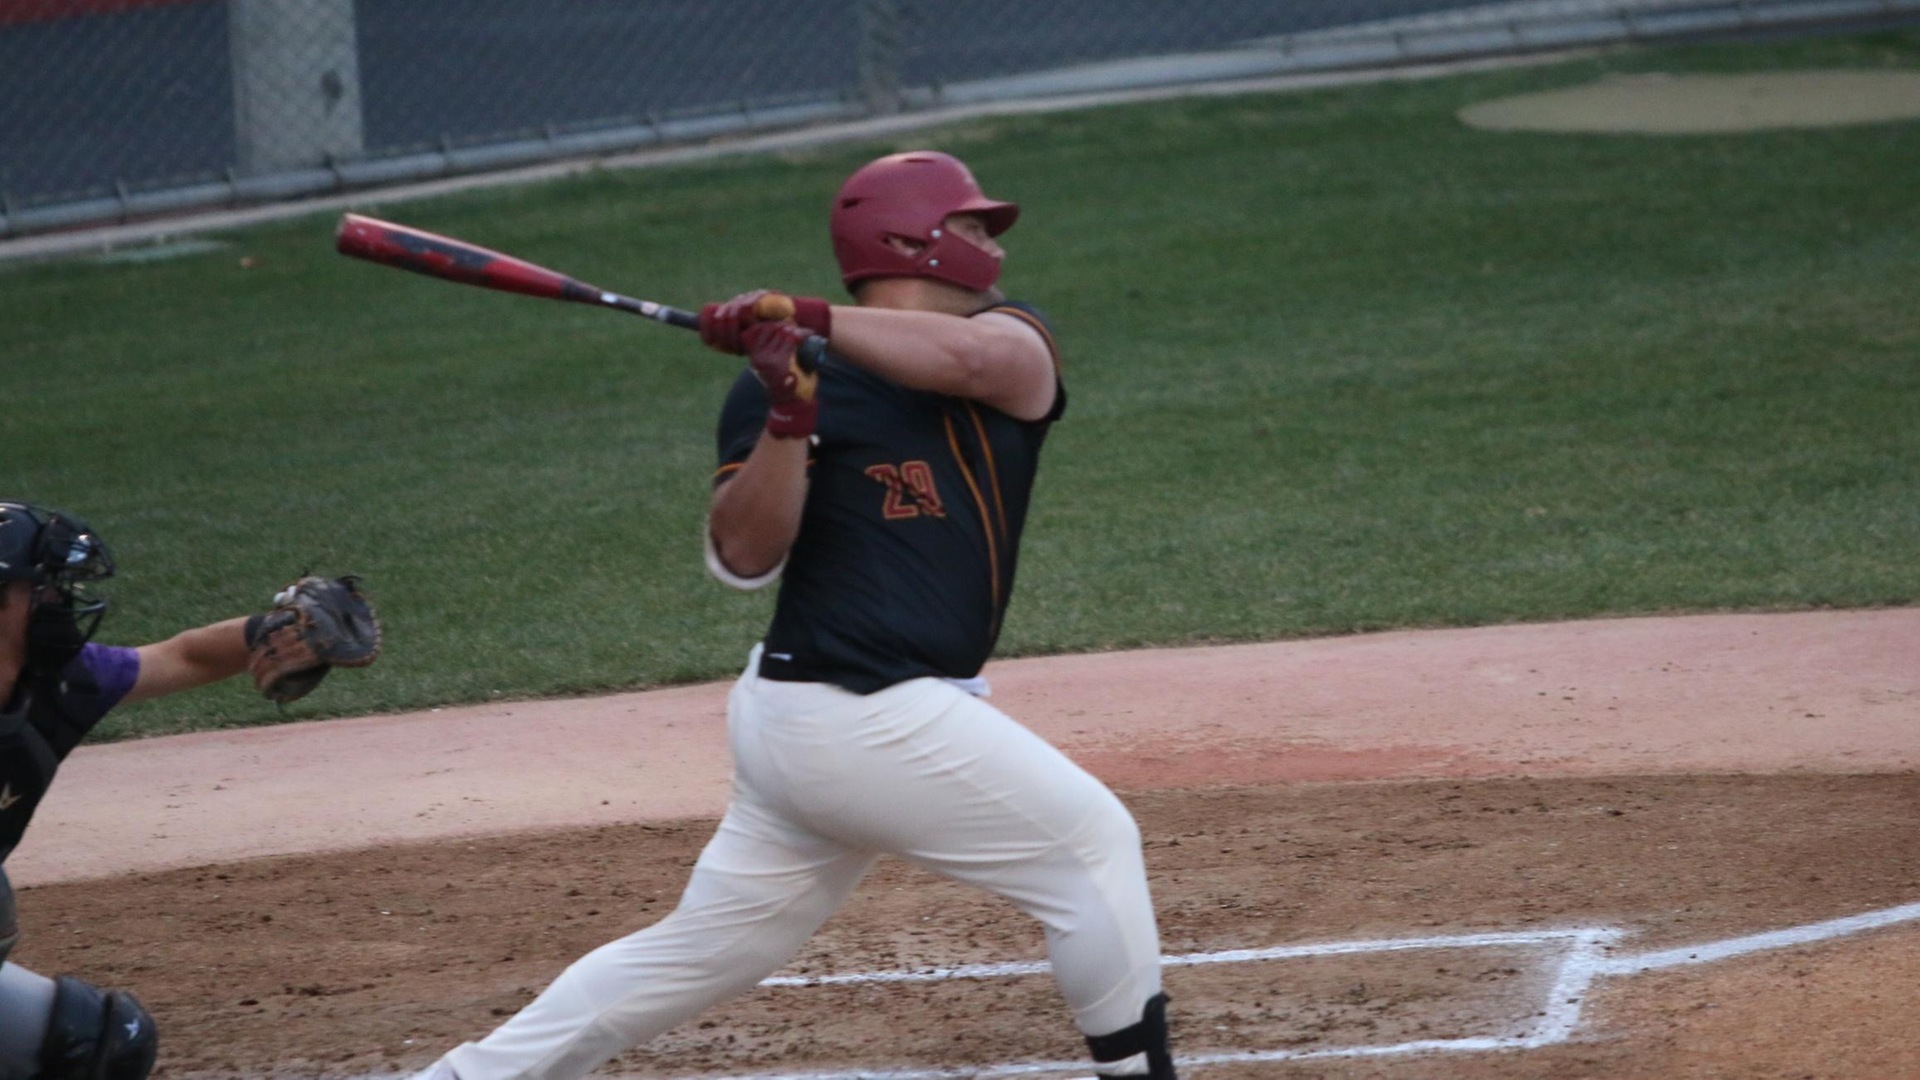 Andrew Mazzone set a new CMS record with 16 home runs this year